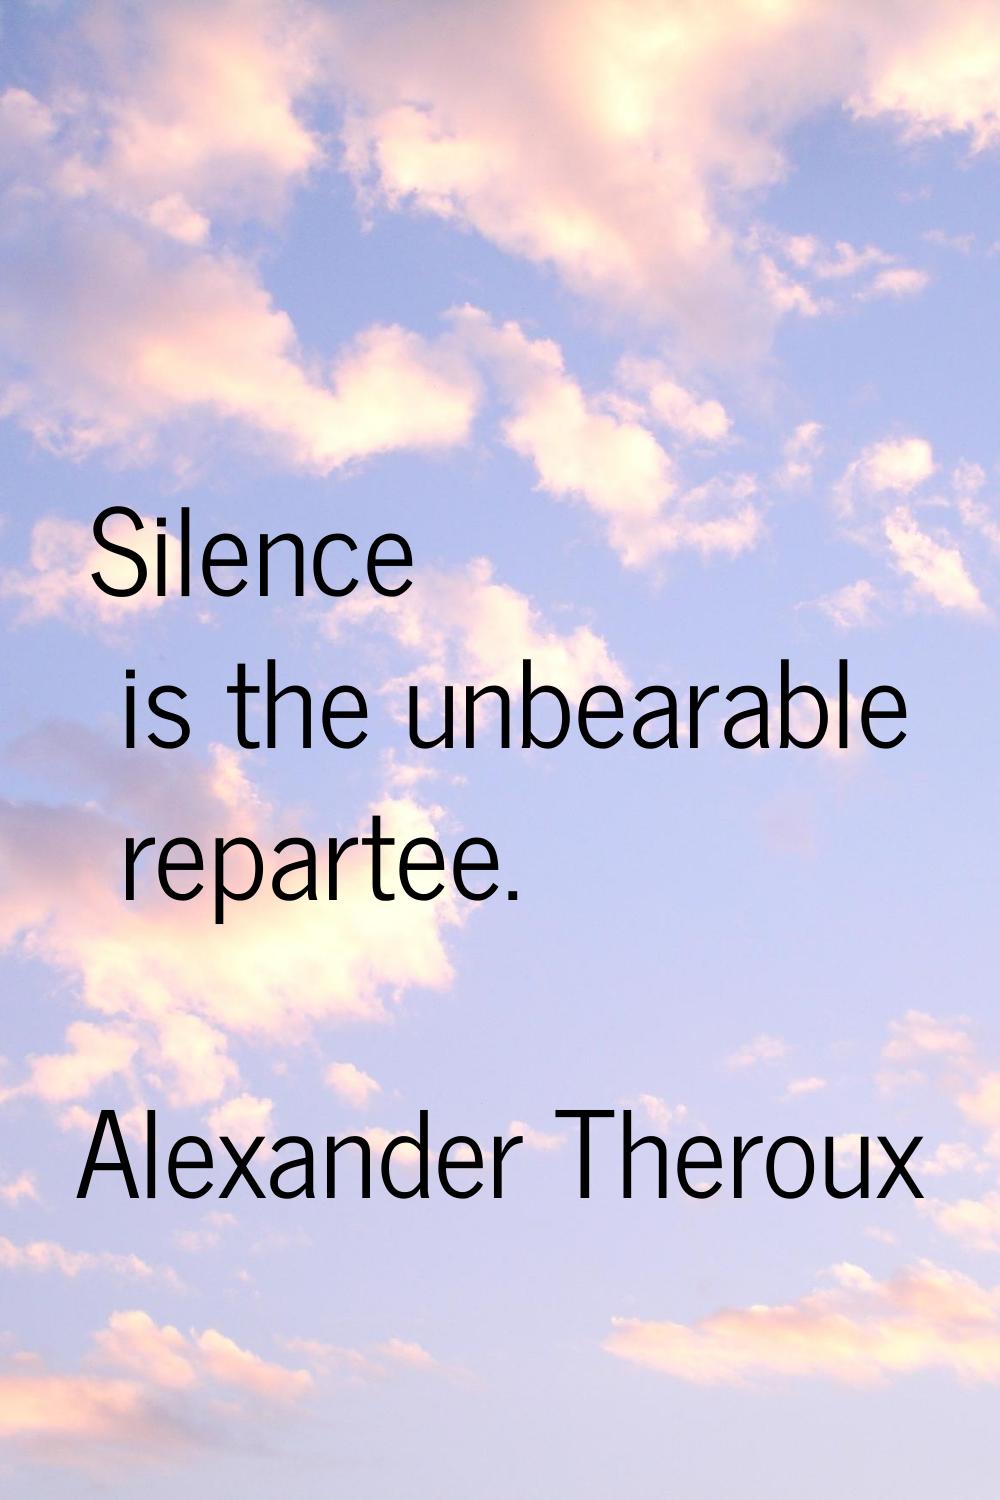 Silence is the unbearable repartee.